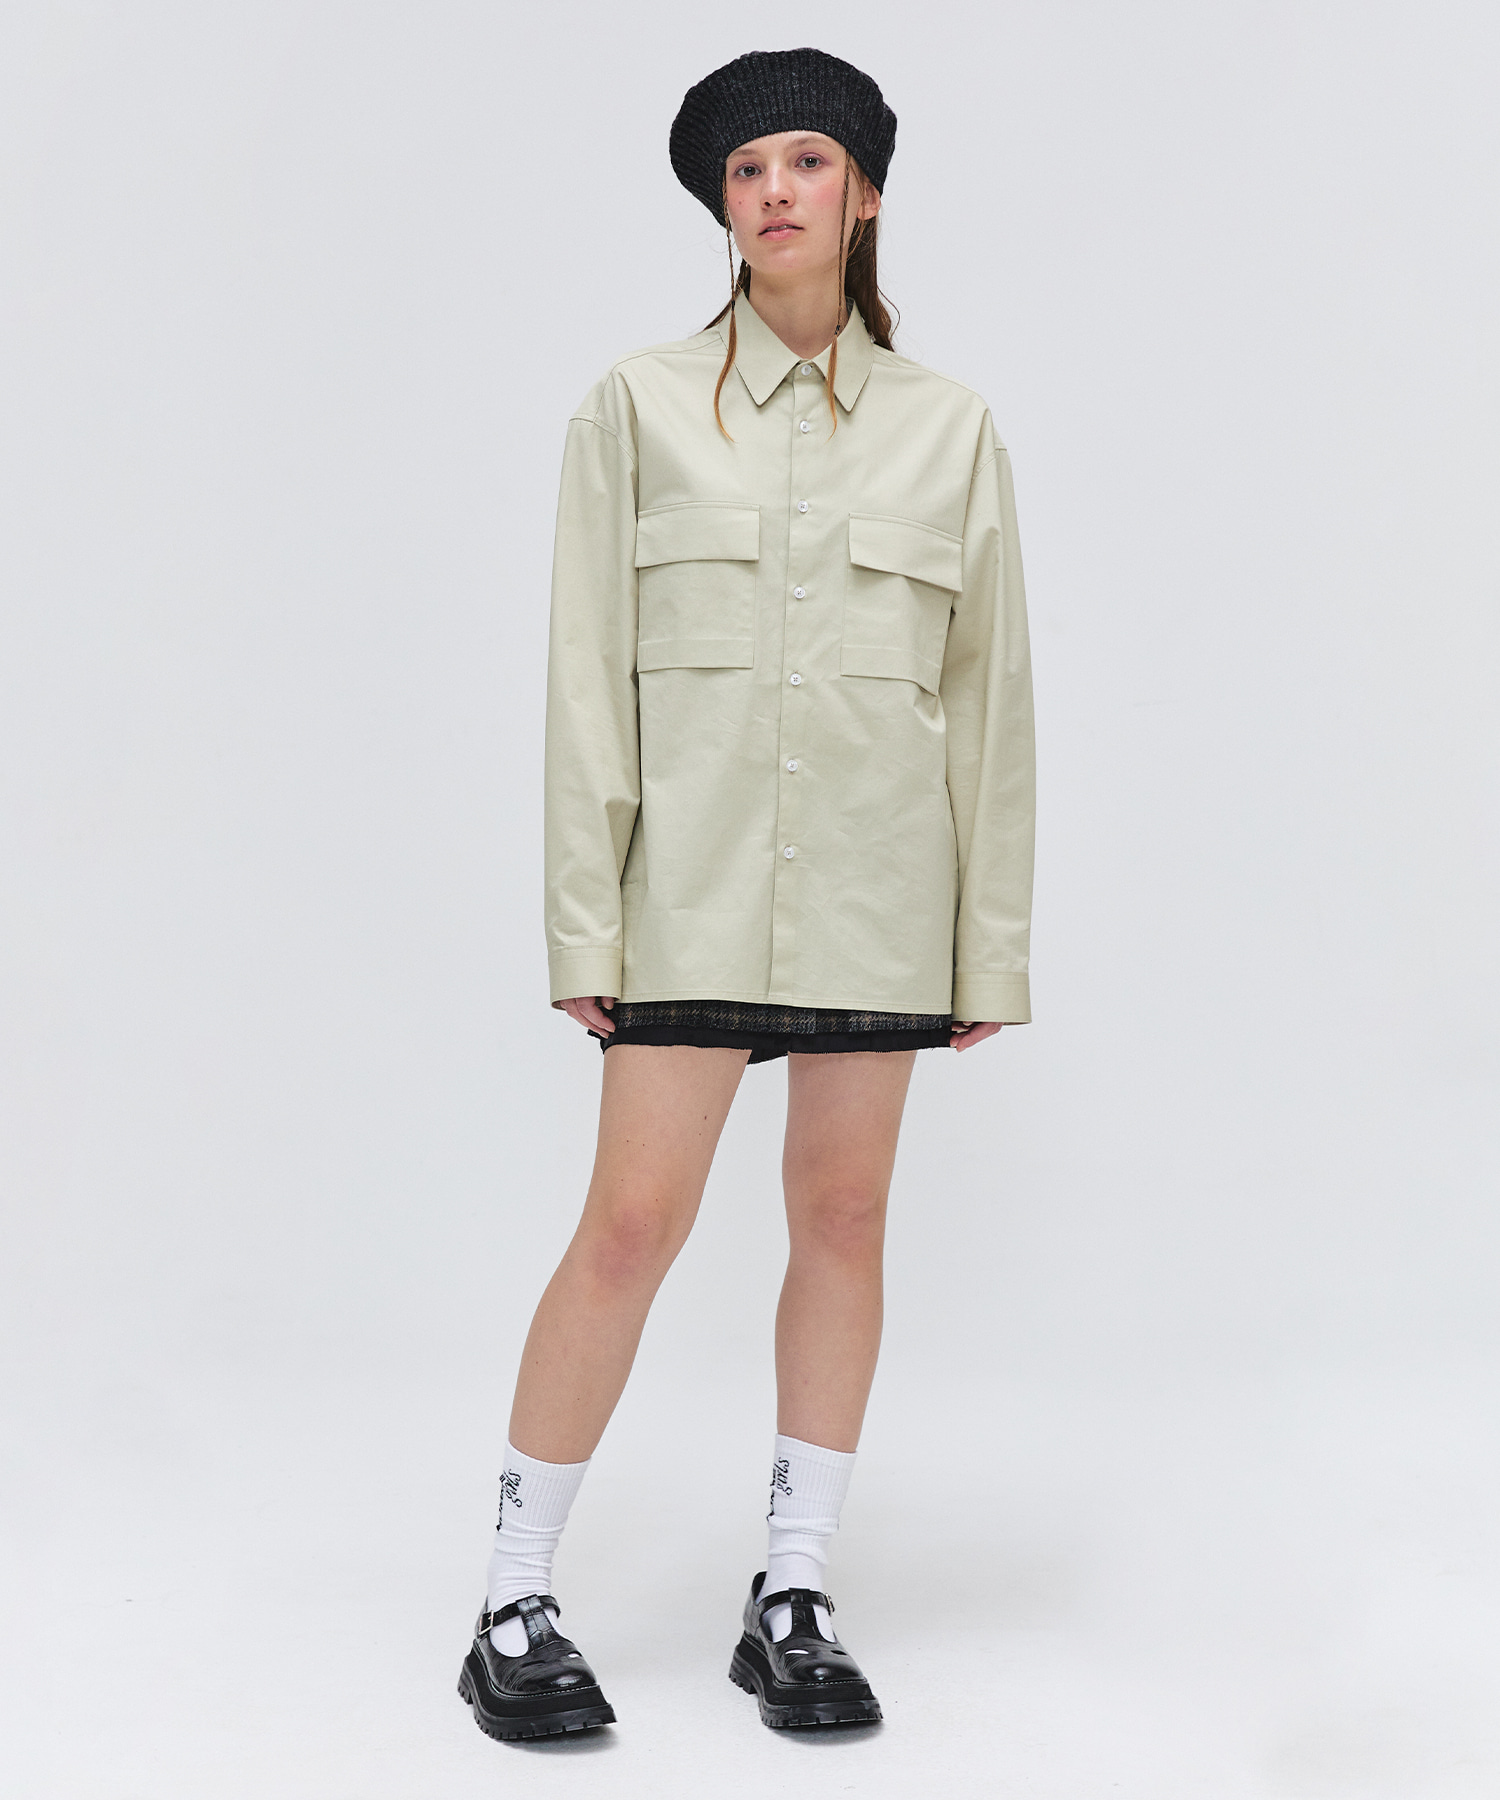 Double Out Pocket Shirt - Beige